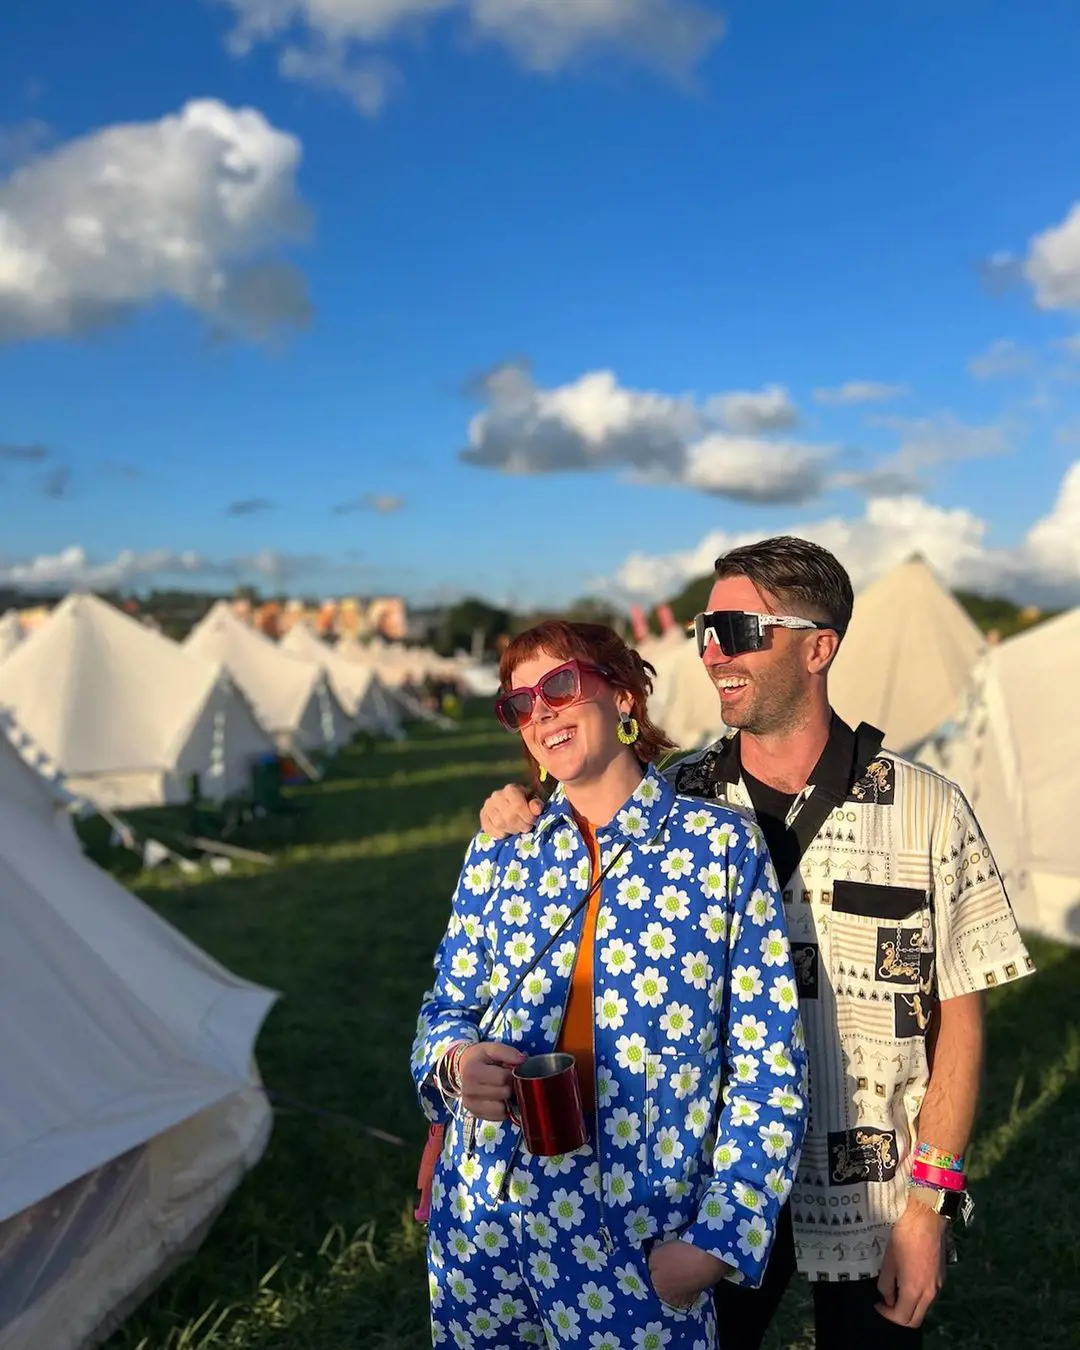 The lovely couple attended the Glastonbury Festival in 2022